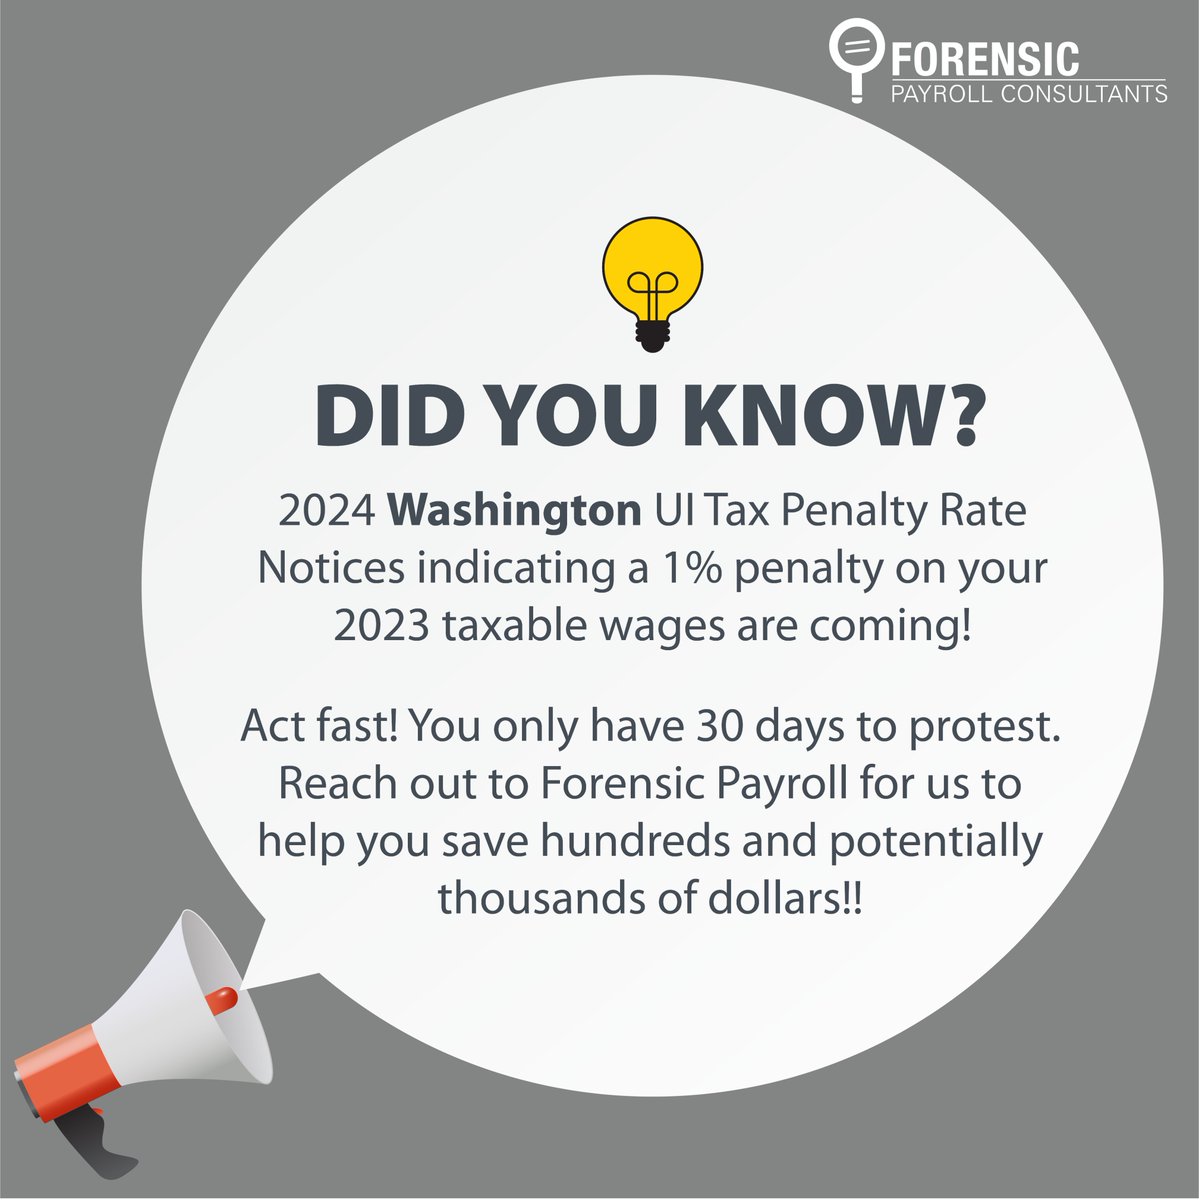 🚨 Washington Employers!

You have 30 days to protest the assigned penalty rate of 1%. If you spot a penalty rate, reach out to Forensic Payroll for help!⏳

#PayrollTax #Washington #AskFPC #Unemploymenttaxes #PayrollCompliance  #UnemploymentTaxAppeal #UITaxPenalty #PayrollExpert